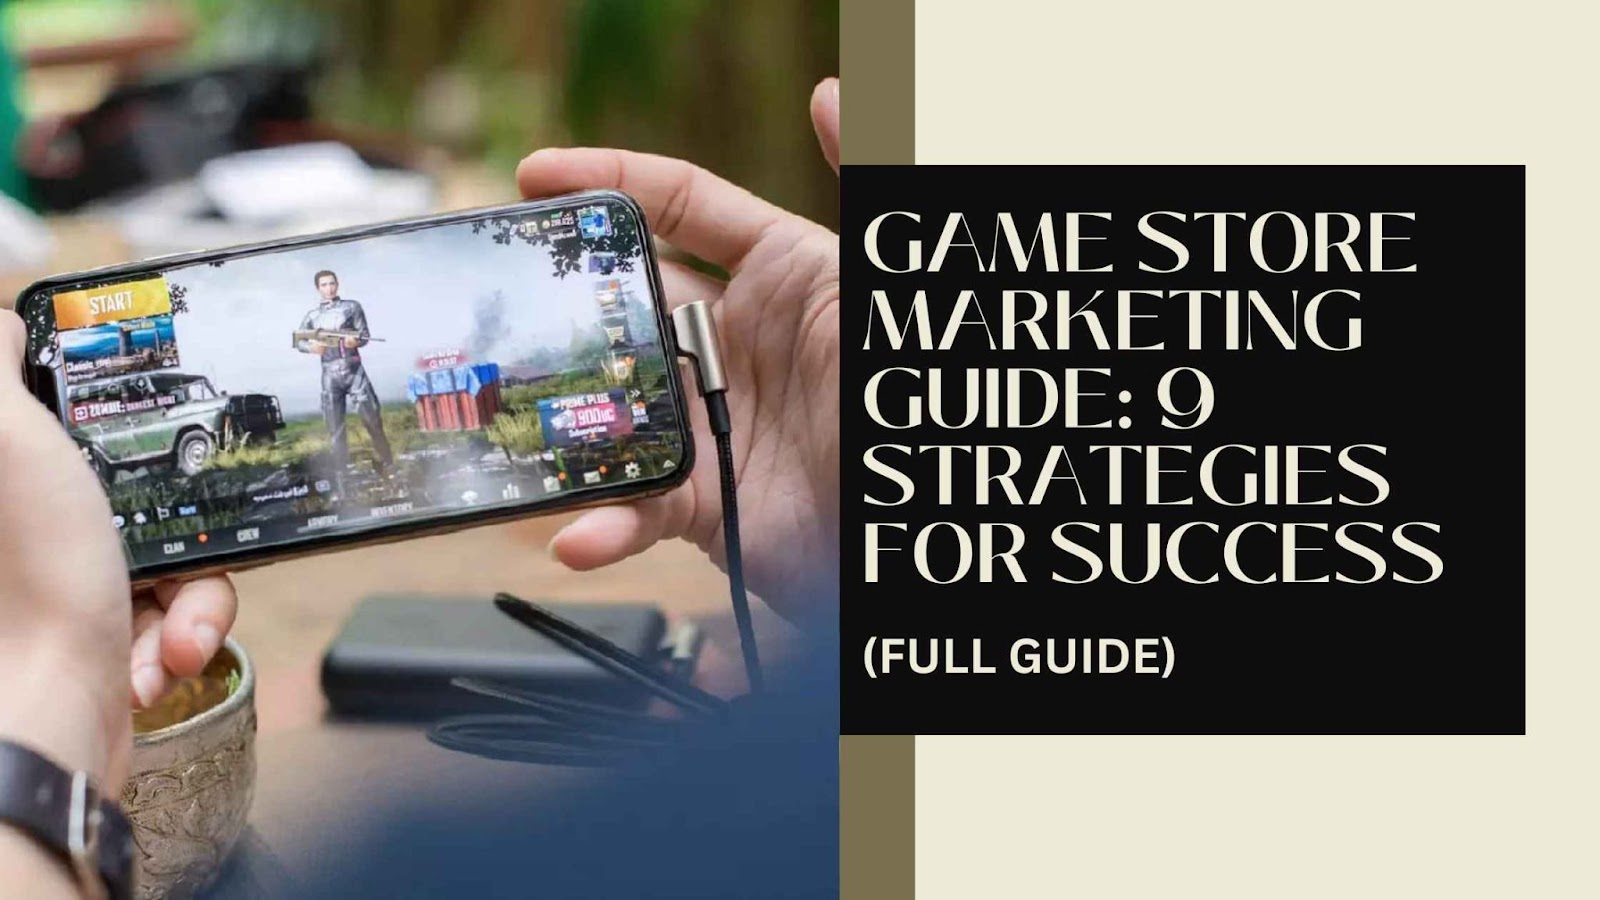 Game Store Marketing Guide: